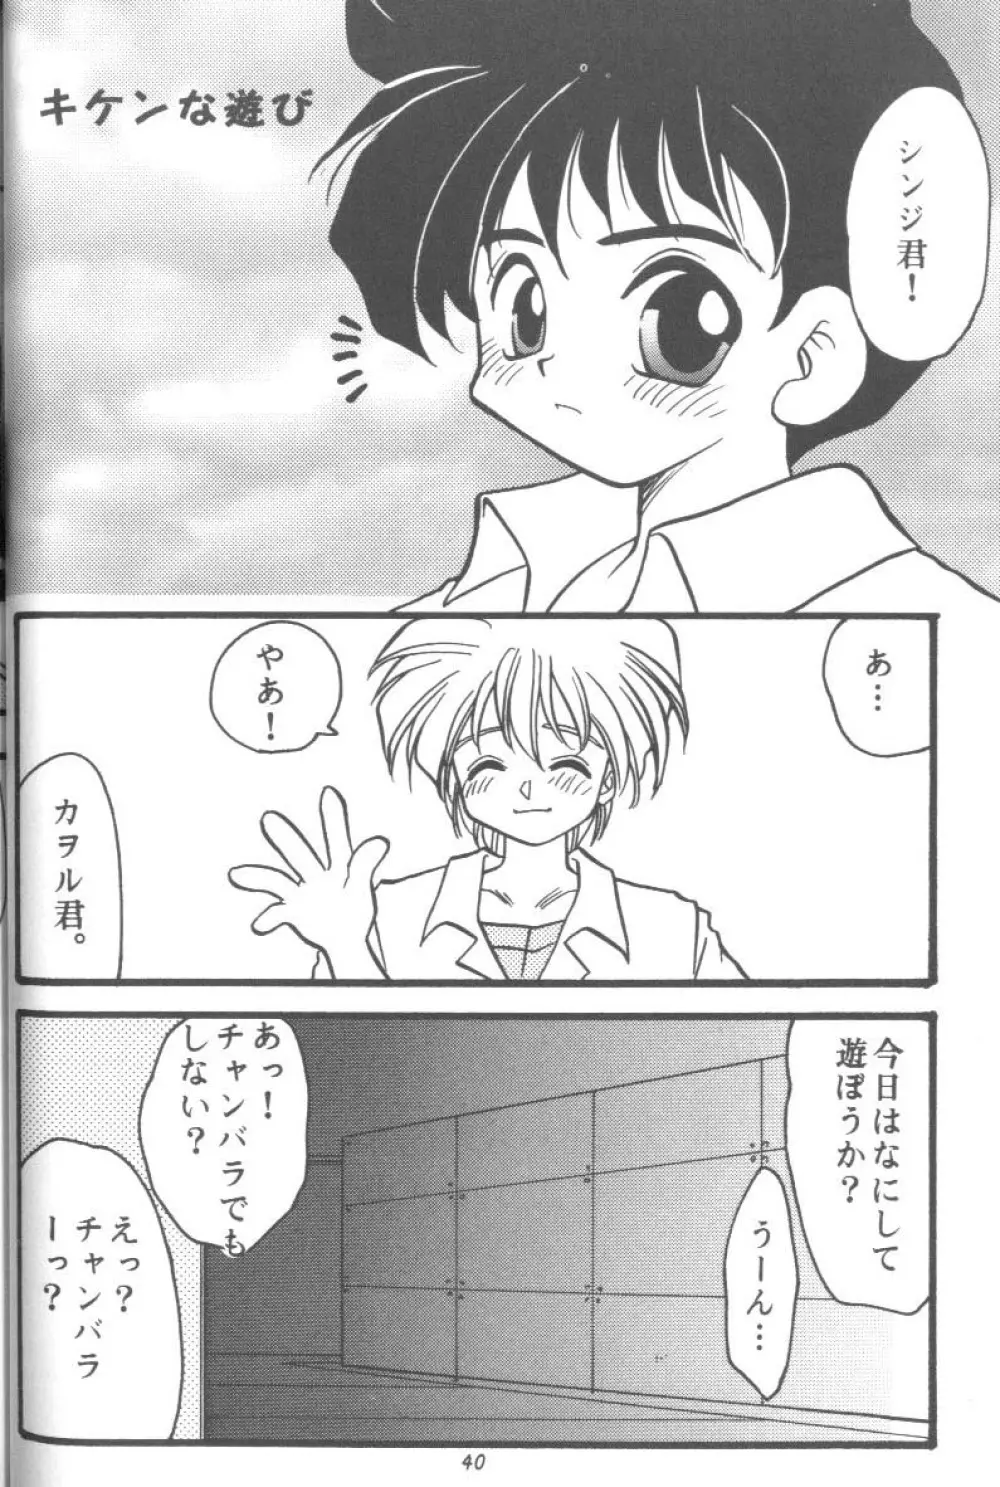 From The Neon Genesis 02 40ページ